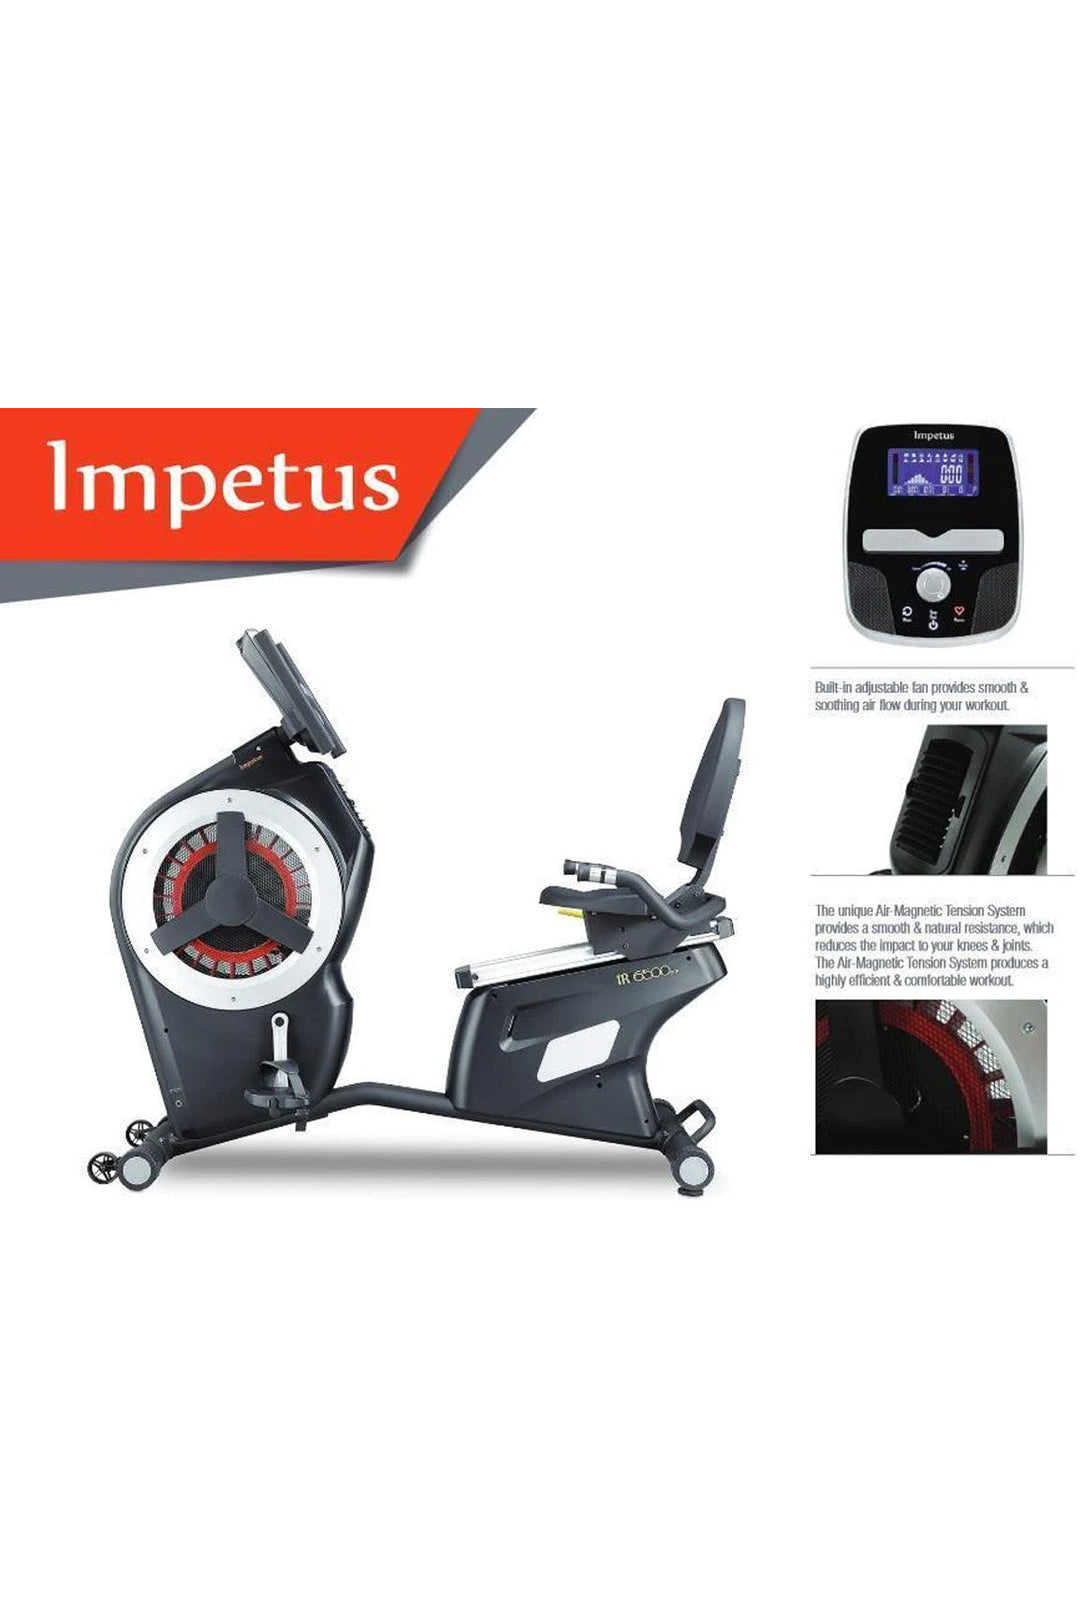 Impetus Light Commercial Recumbent Bike AIR6500AMV2 (FLOOR STOCK PICK UP ONLY MELBOURNE)